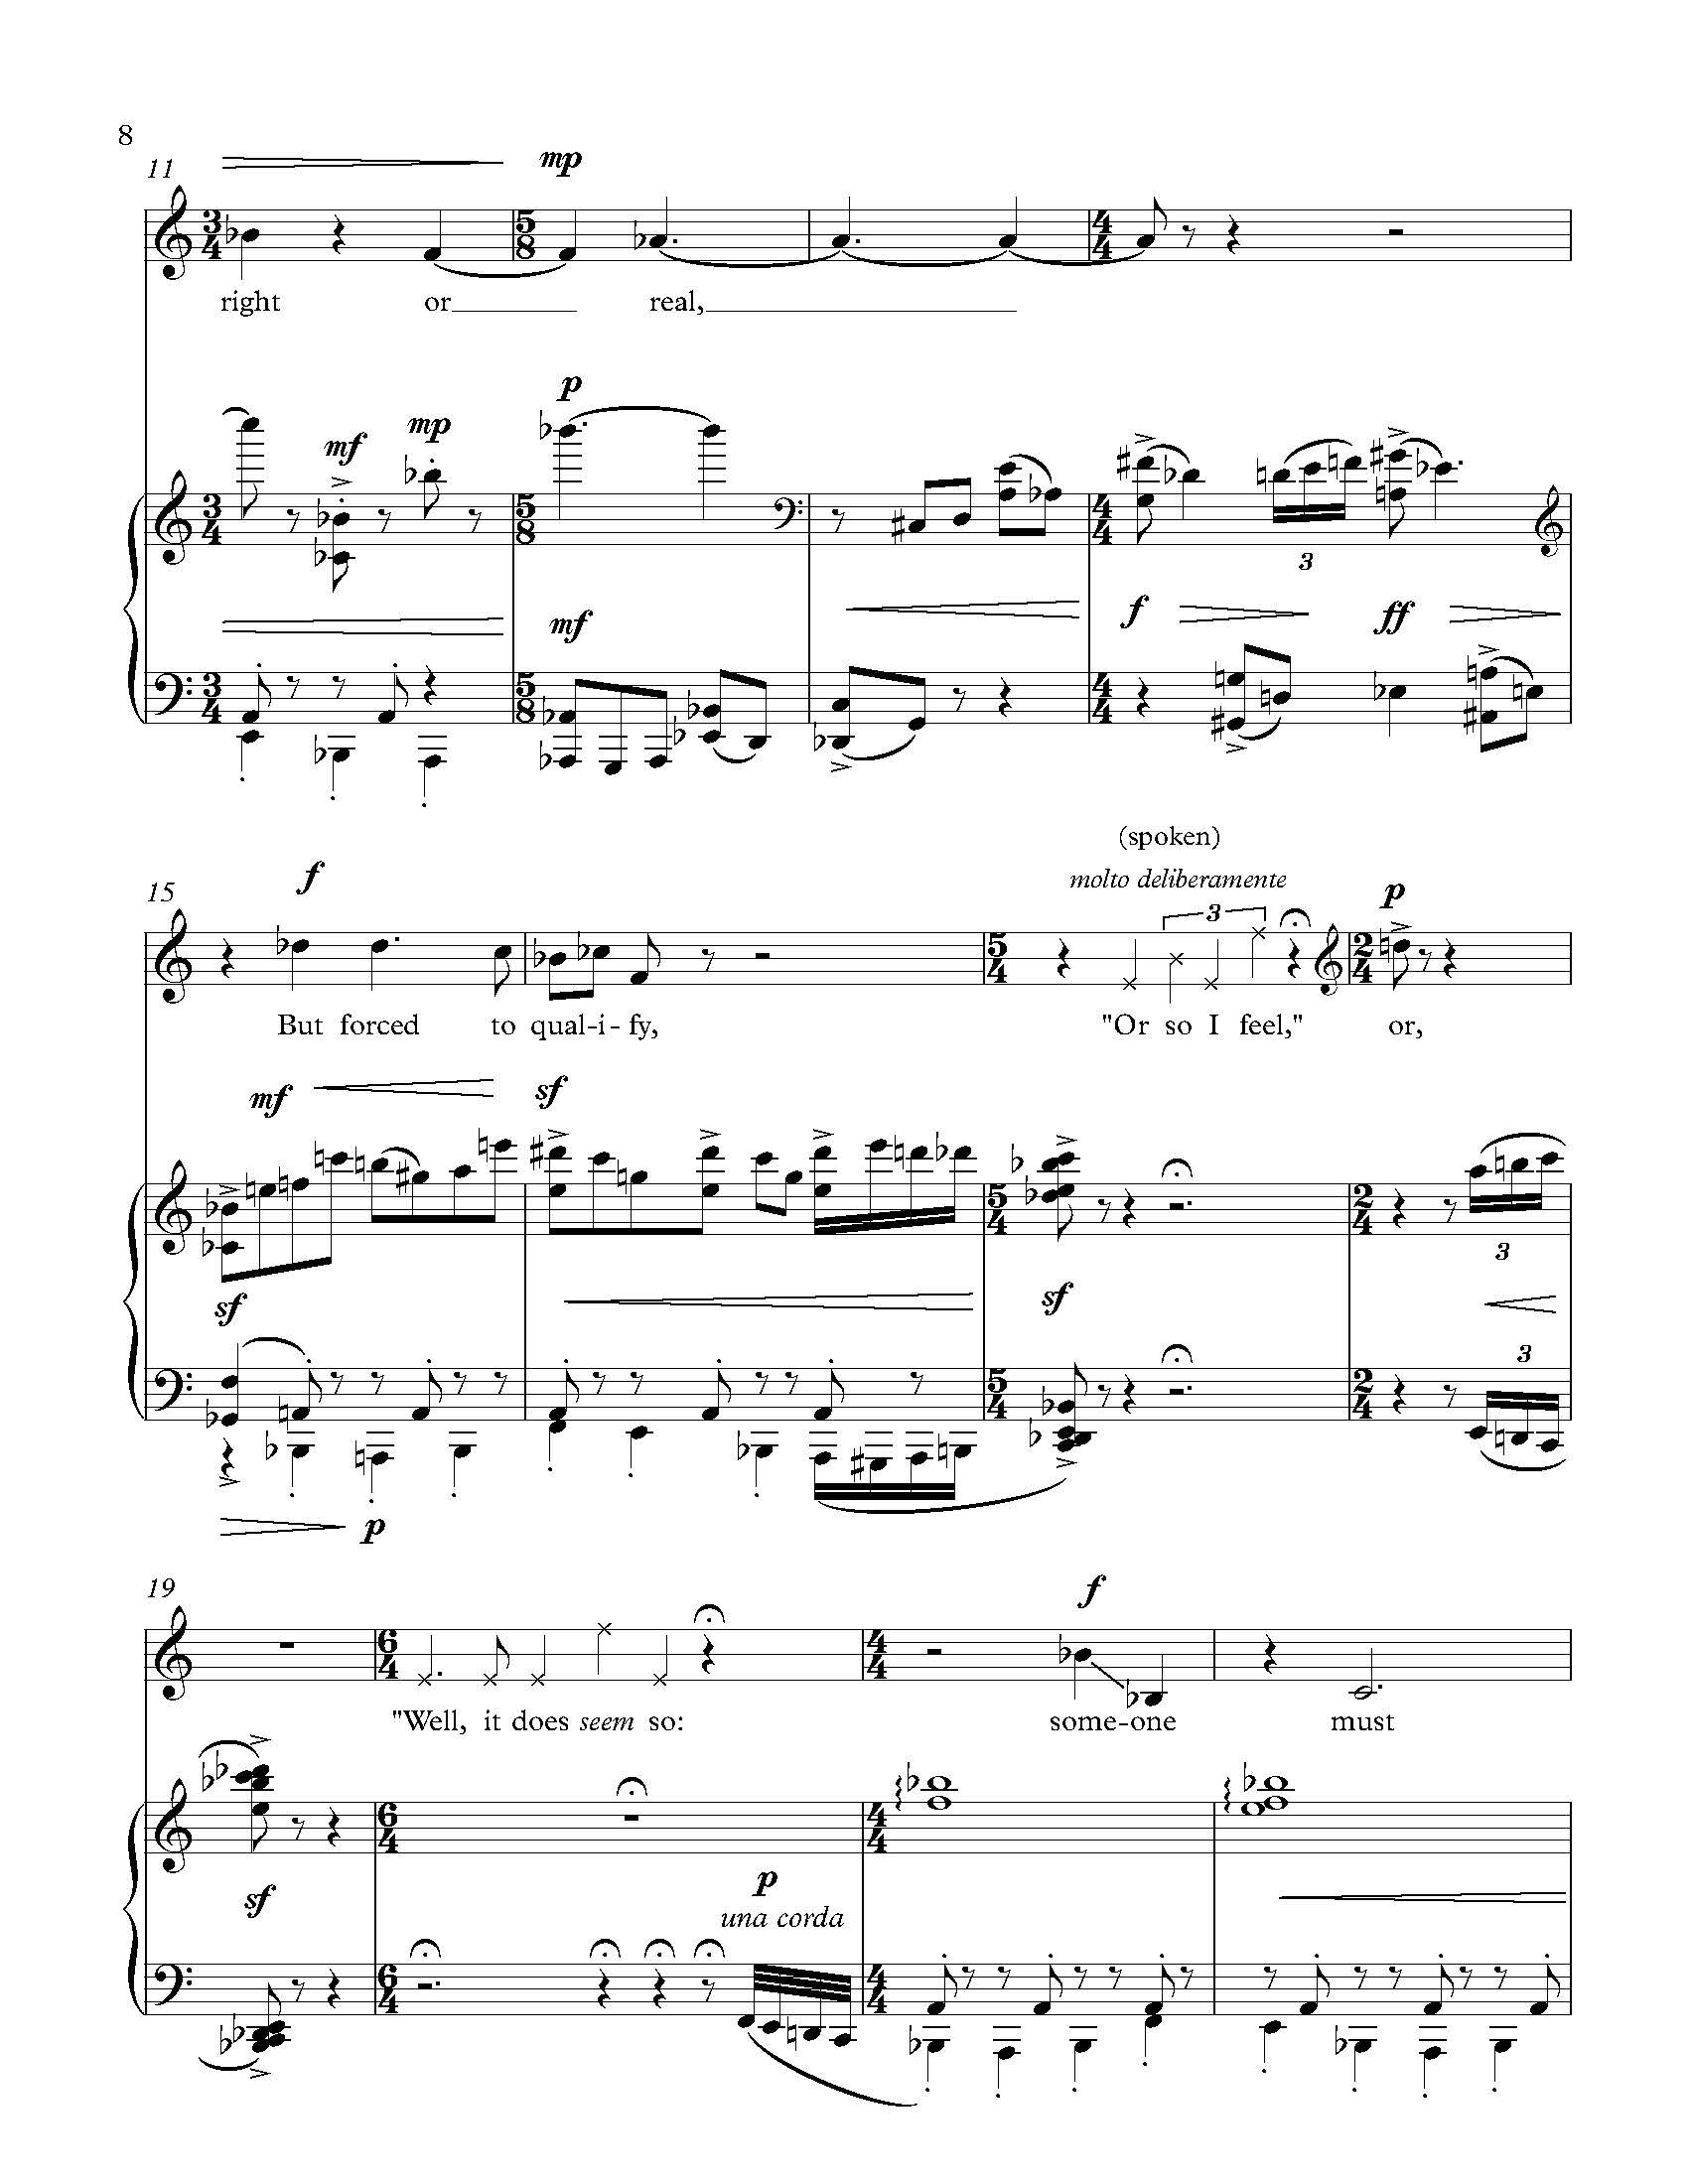 The Explosion - Complete Score_Page_14.jpg